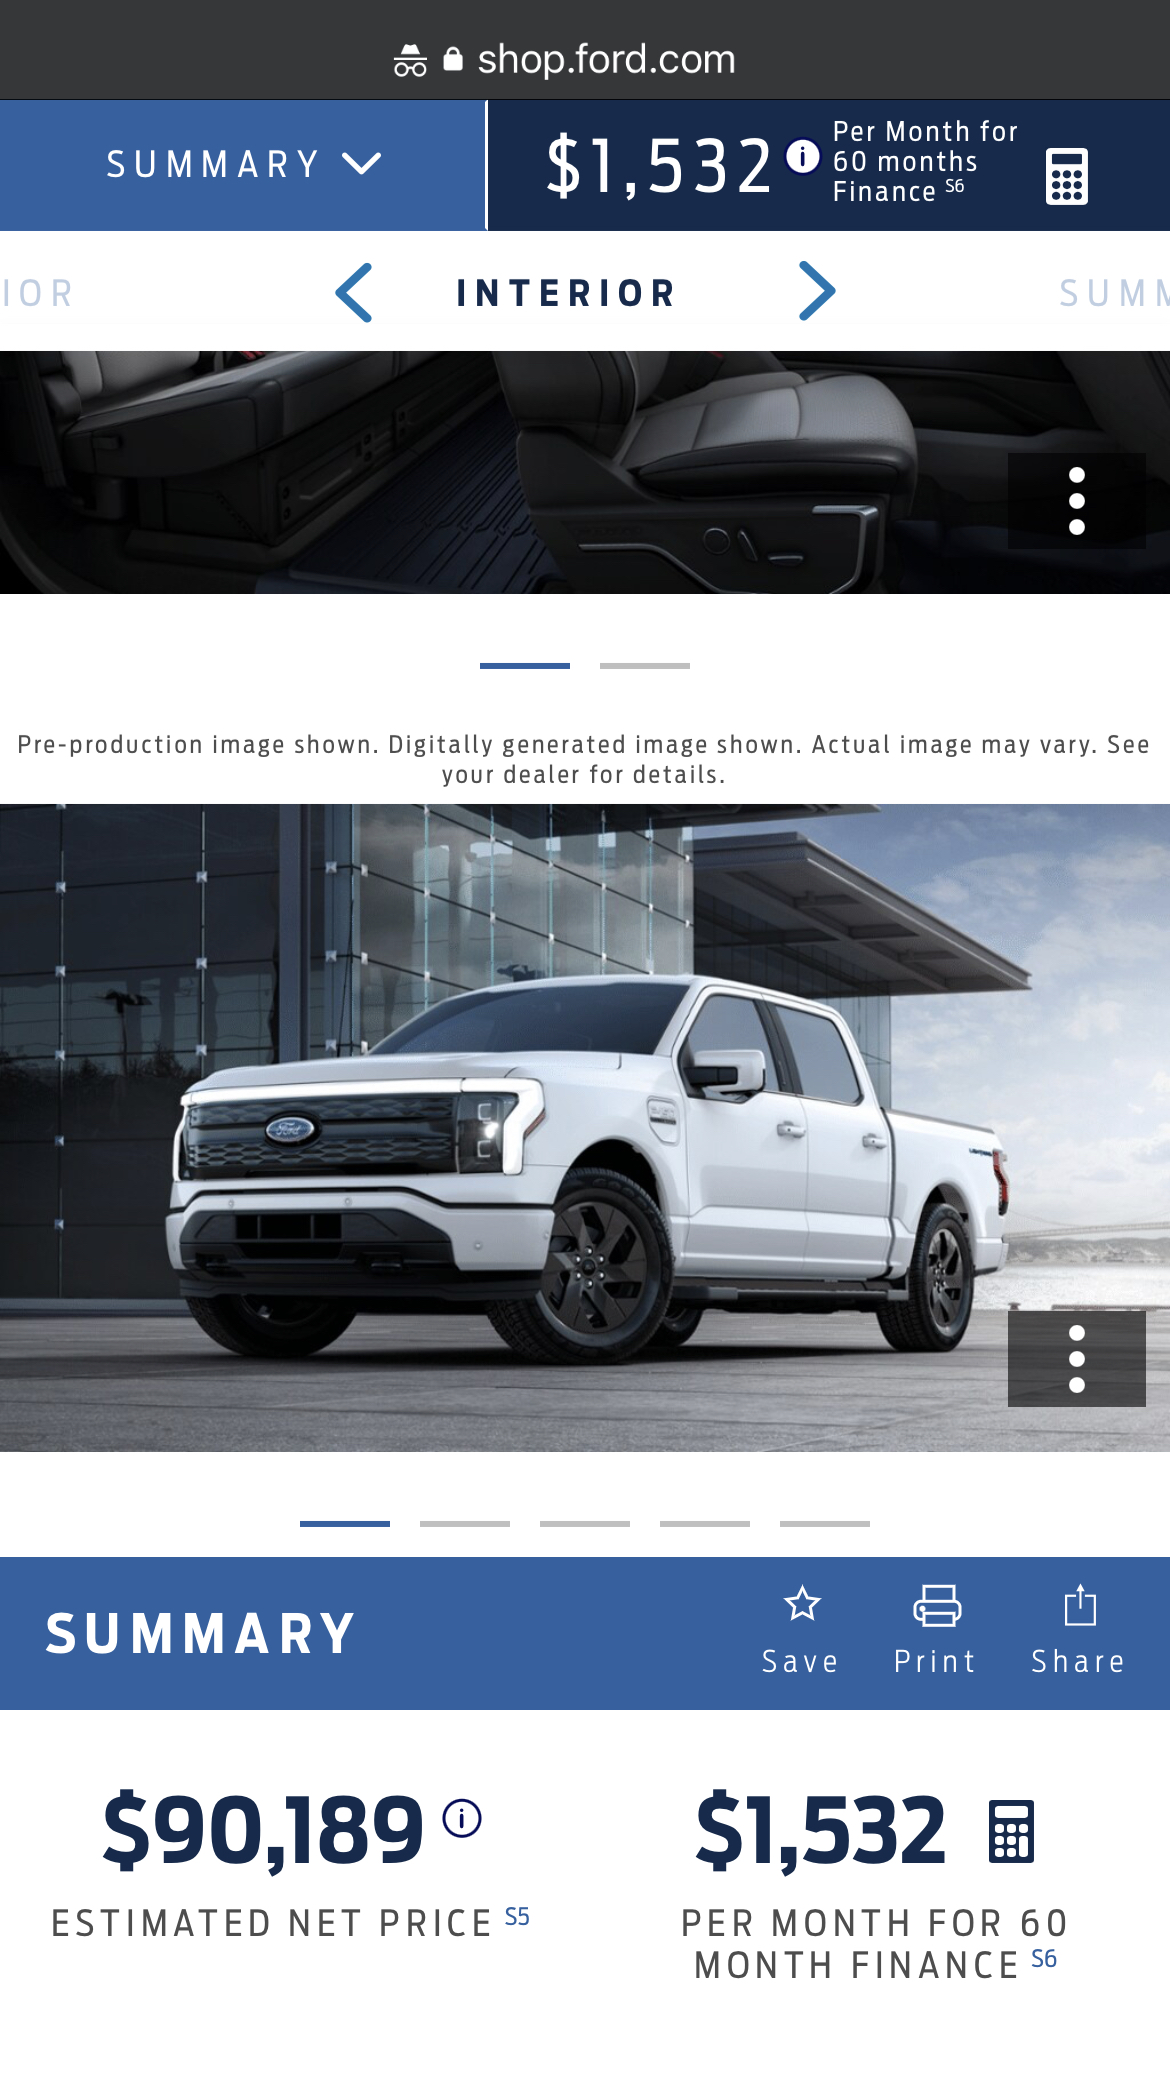 Ford F-150 Lightning 2023 Lightning Build and Price is Live .... $5000+ increase in price 2D7EA5E9-AAA5-49E7-B98A-8D4787E2321D